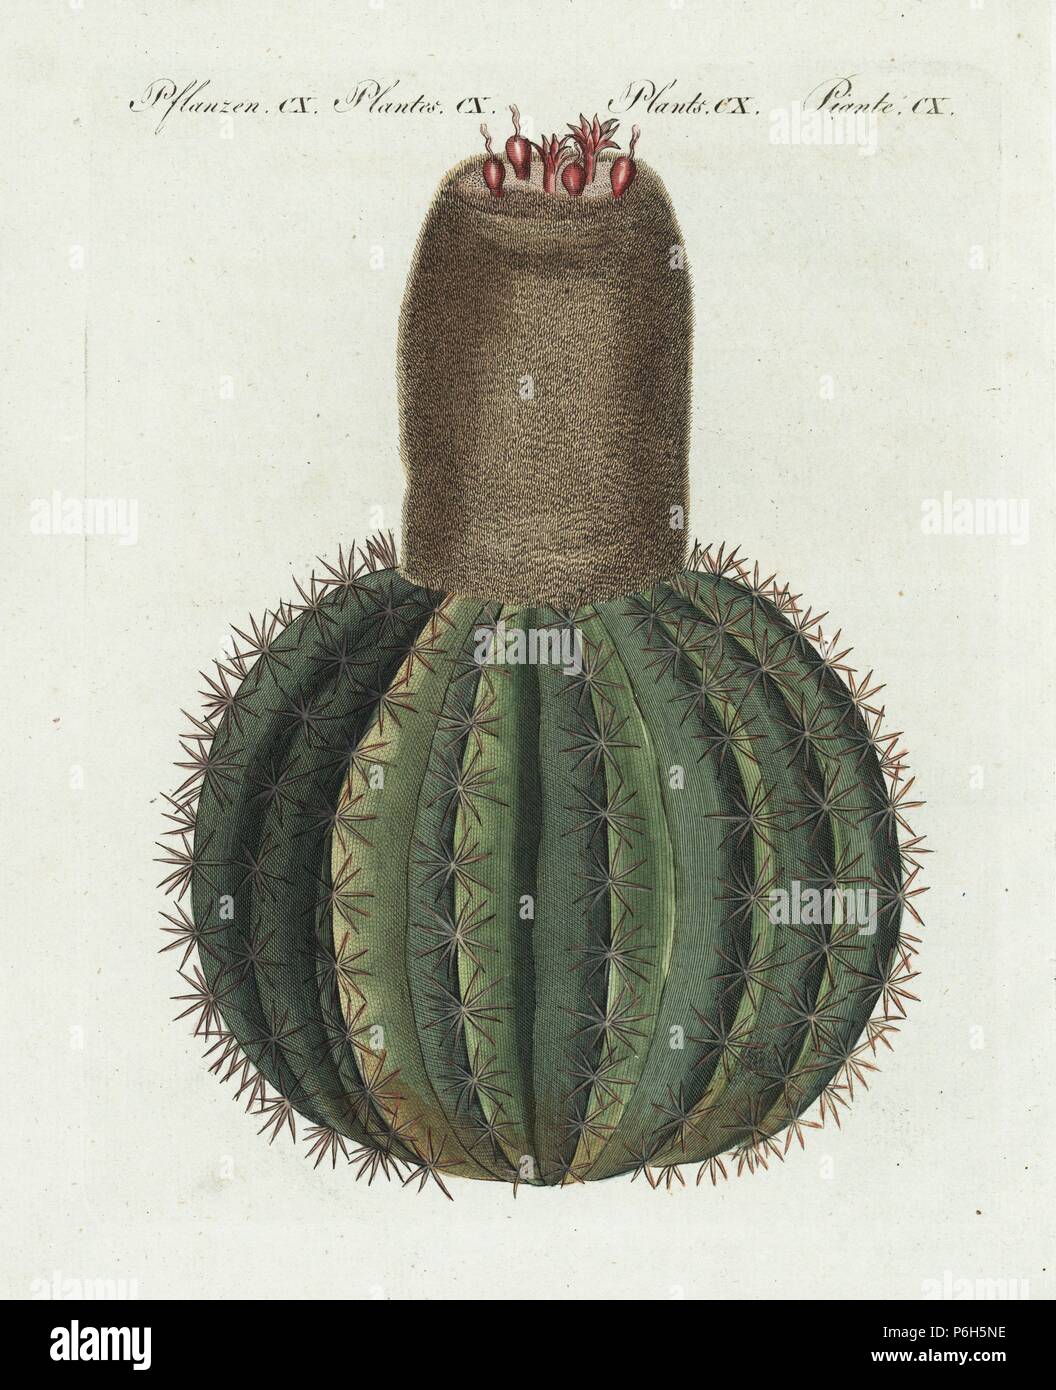 Turk's head cactus, Melocactus caroli-linnaei. Taken from Candolle and Redoute, 'Plantarum Historia Succulentarum.' Handcoloured copperplate engraving from Bertuch's 'Bilderbuch fur Kinder' (Picture Book for Children), Weimar, 1807. Friedrich Johann Bertuch (1747-1822) was a German publisher and man of arts most famous for his 12-volume encyclopedia for children illustrated with 1,200 engraved plates on natural history, science, costume, mythology, etc., published from 1790-1830. Stock Photo